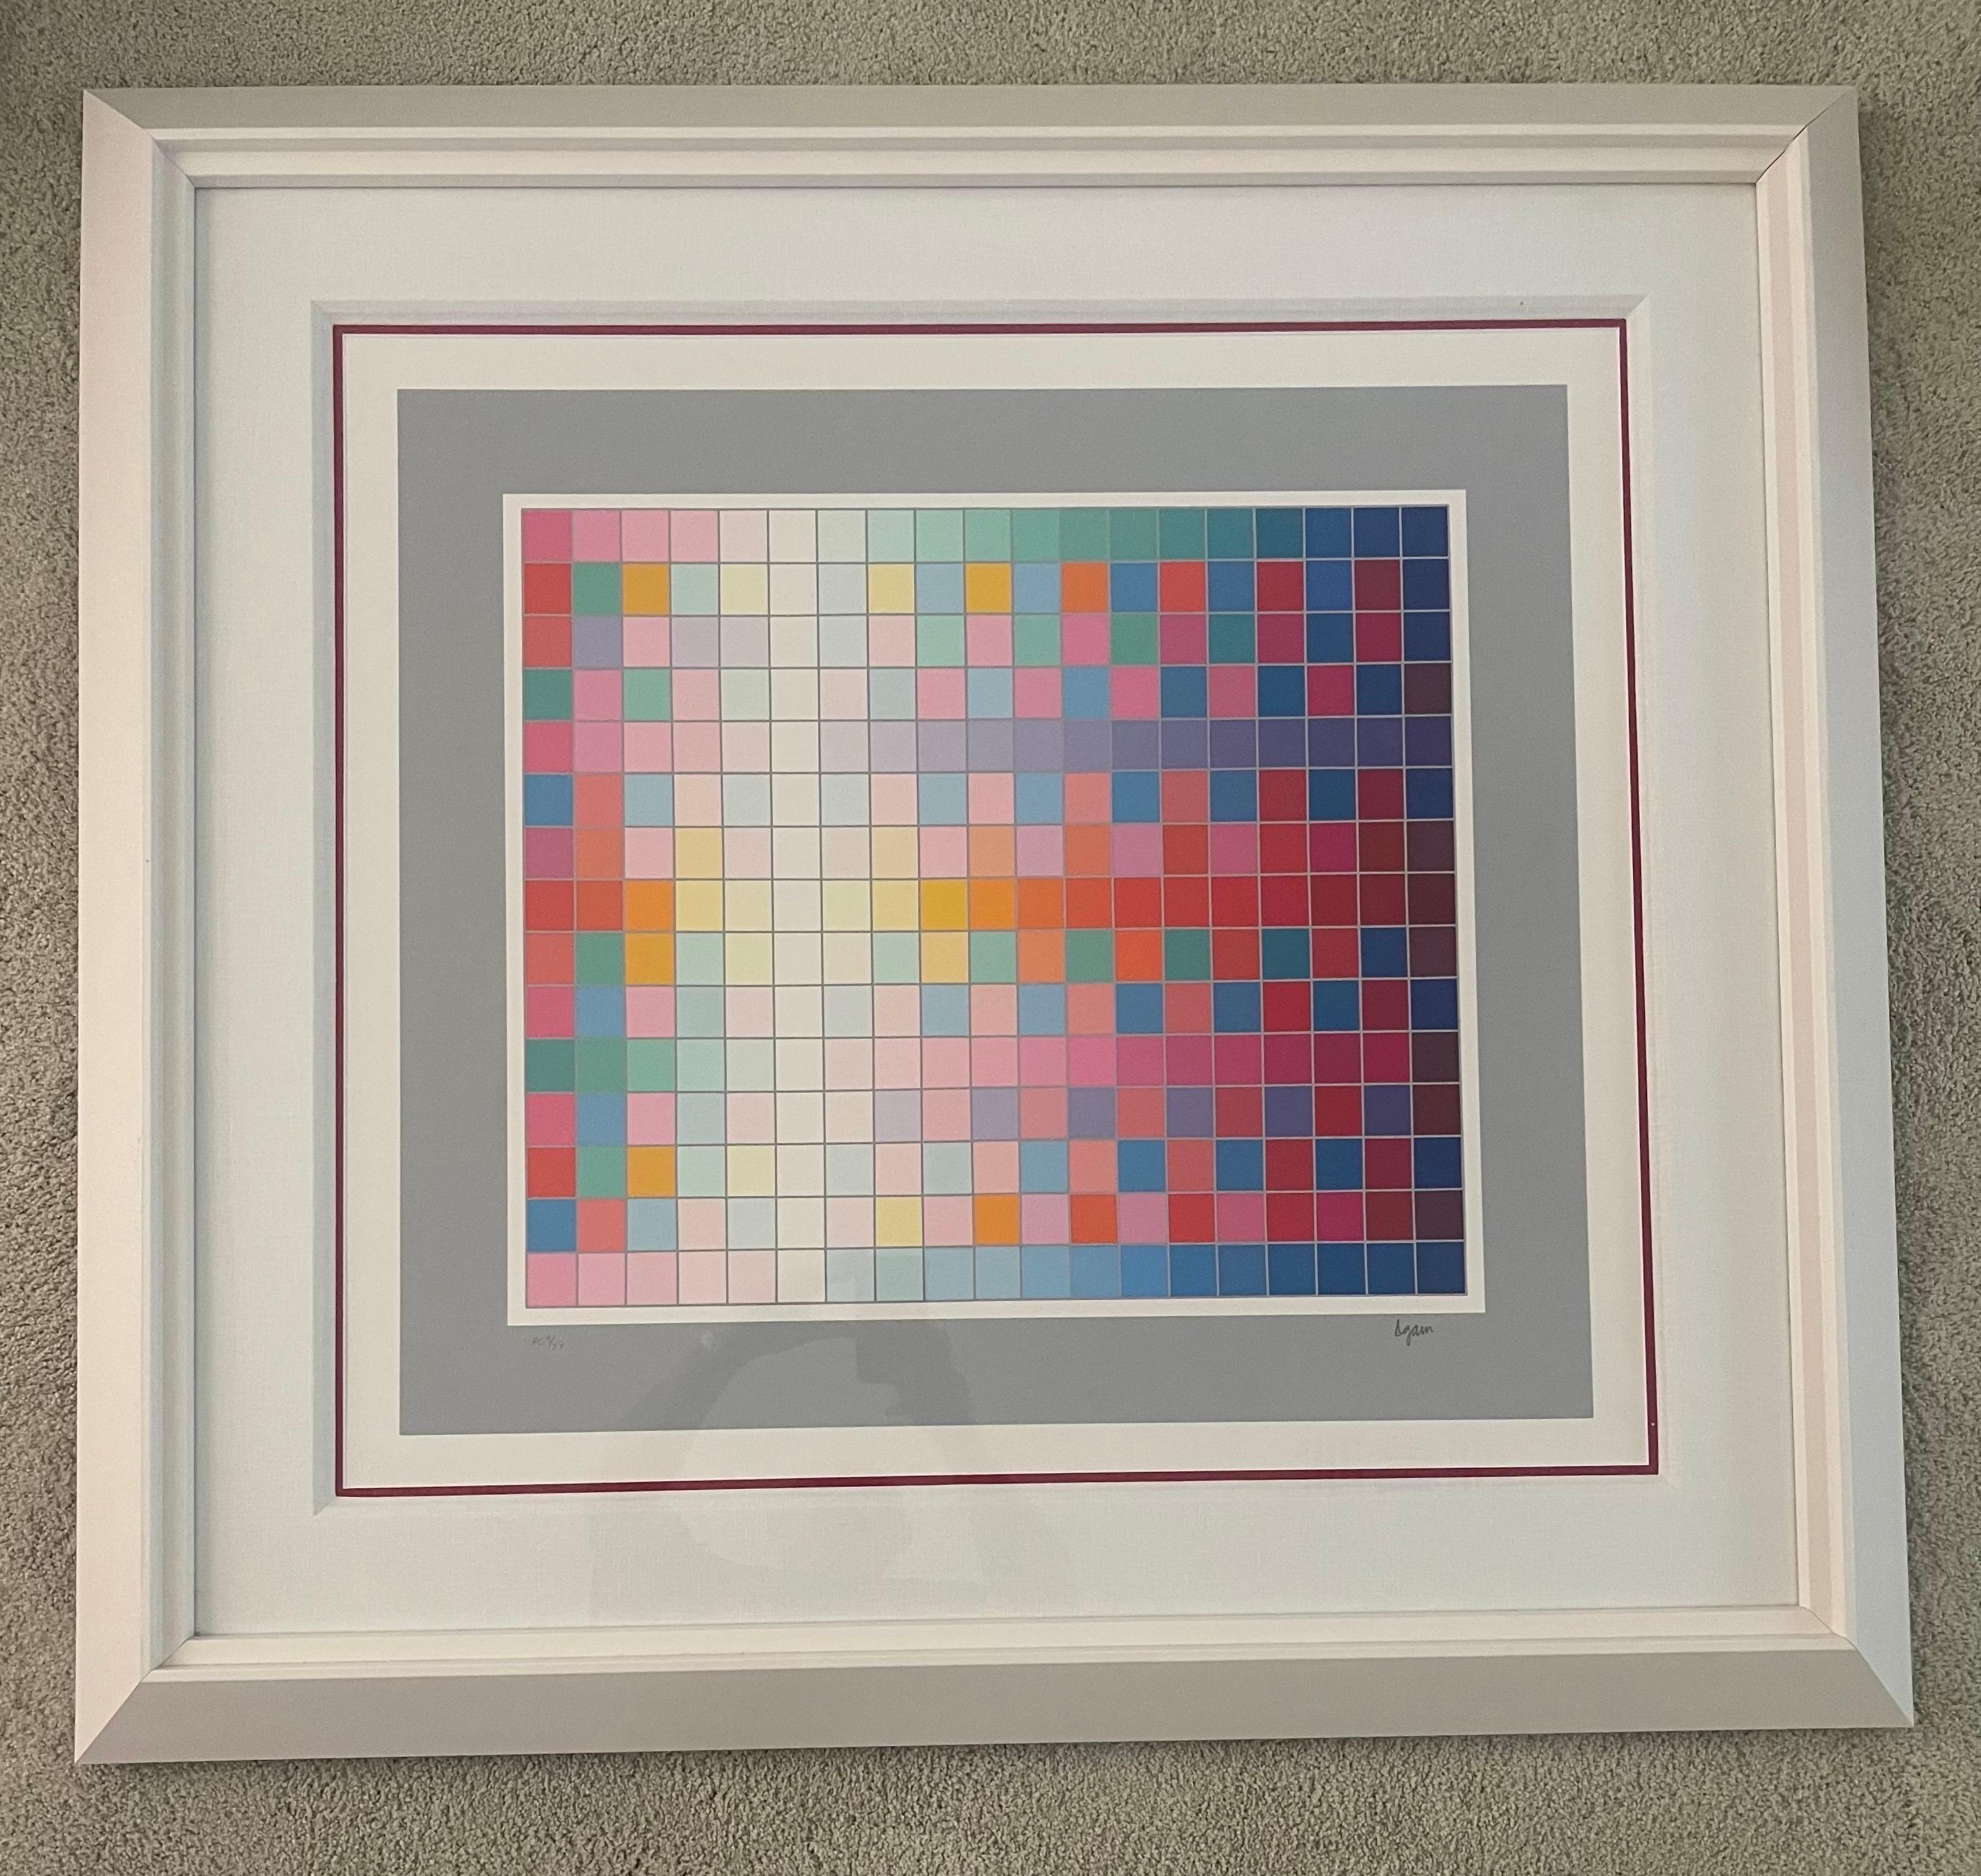 Spectacular signed limited edition post-modern geometric serigraph entitled 